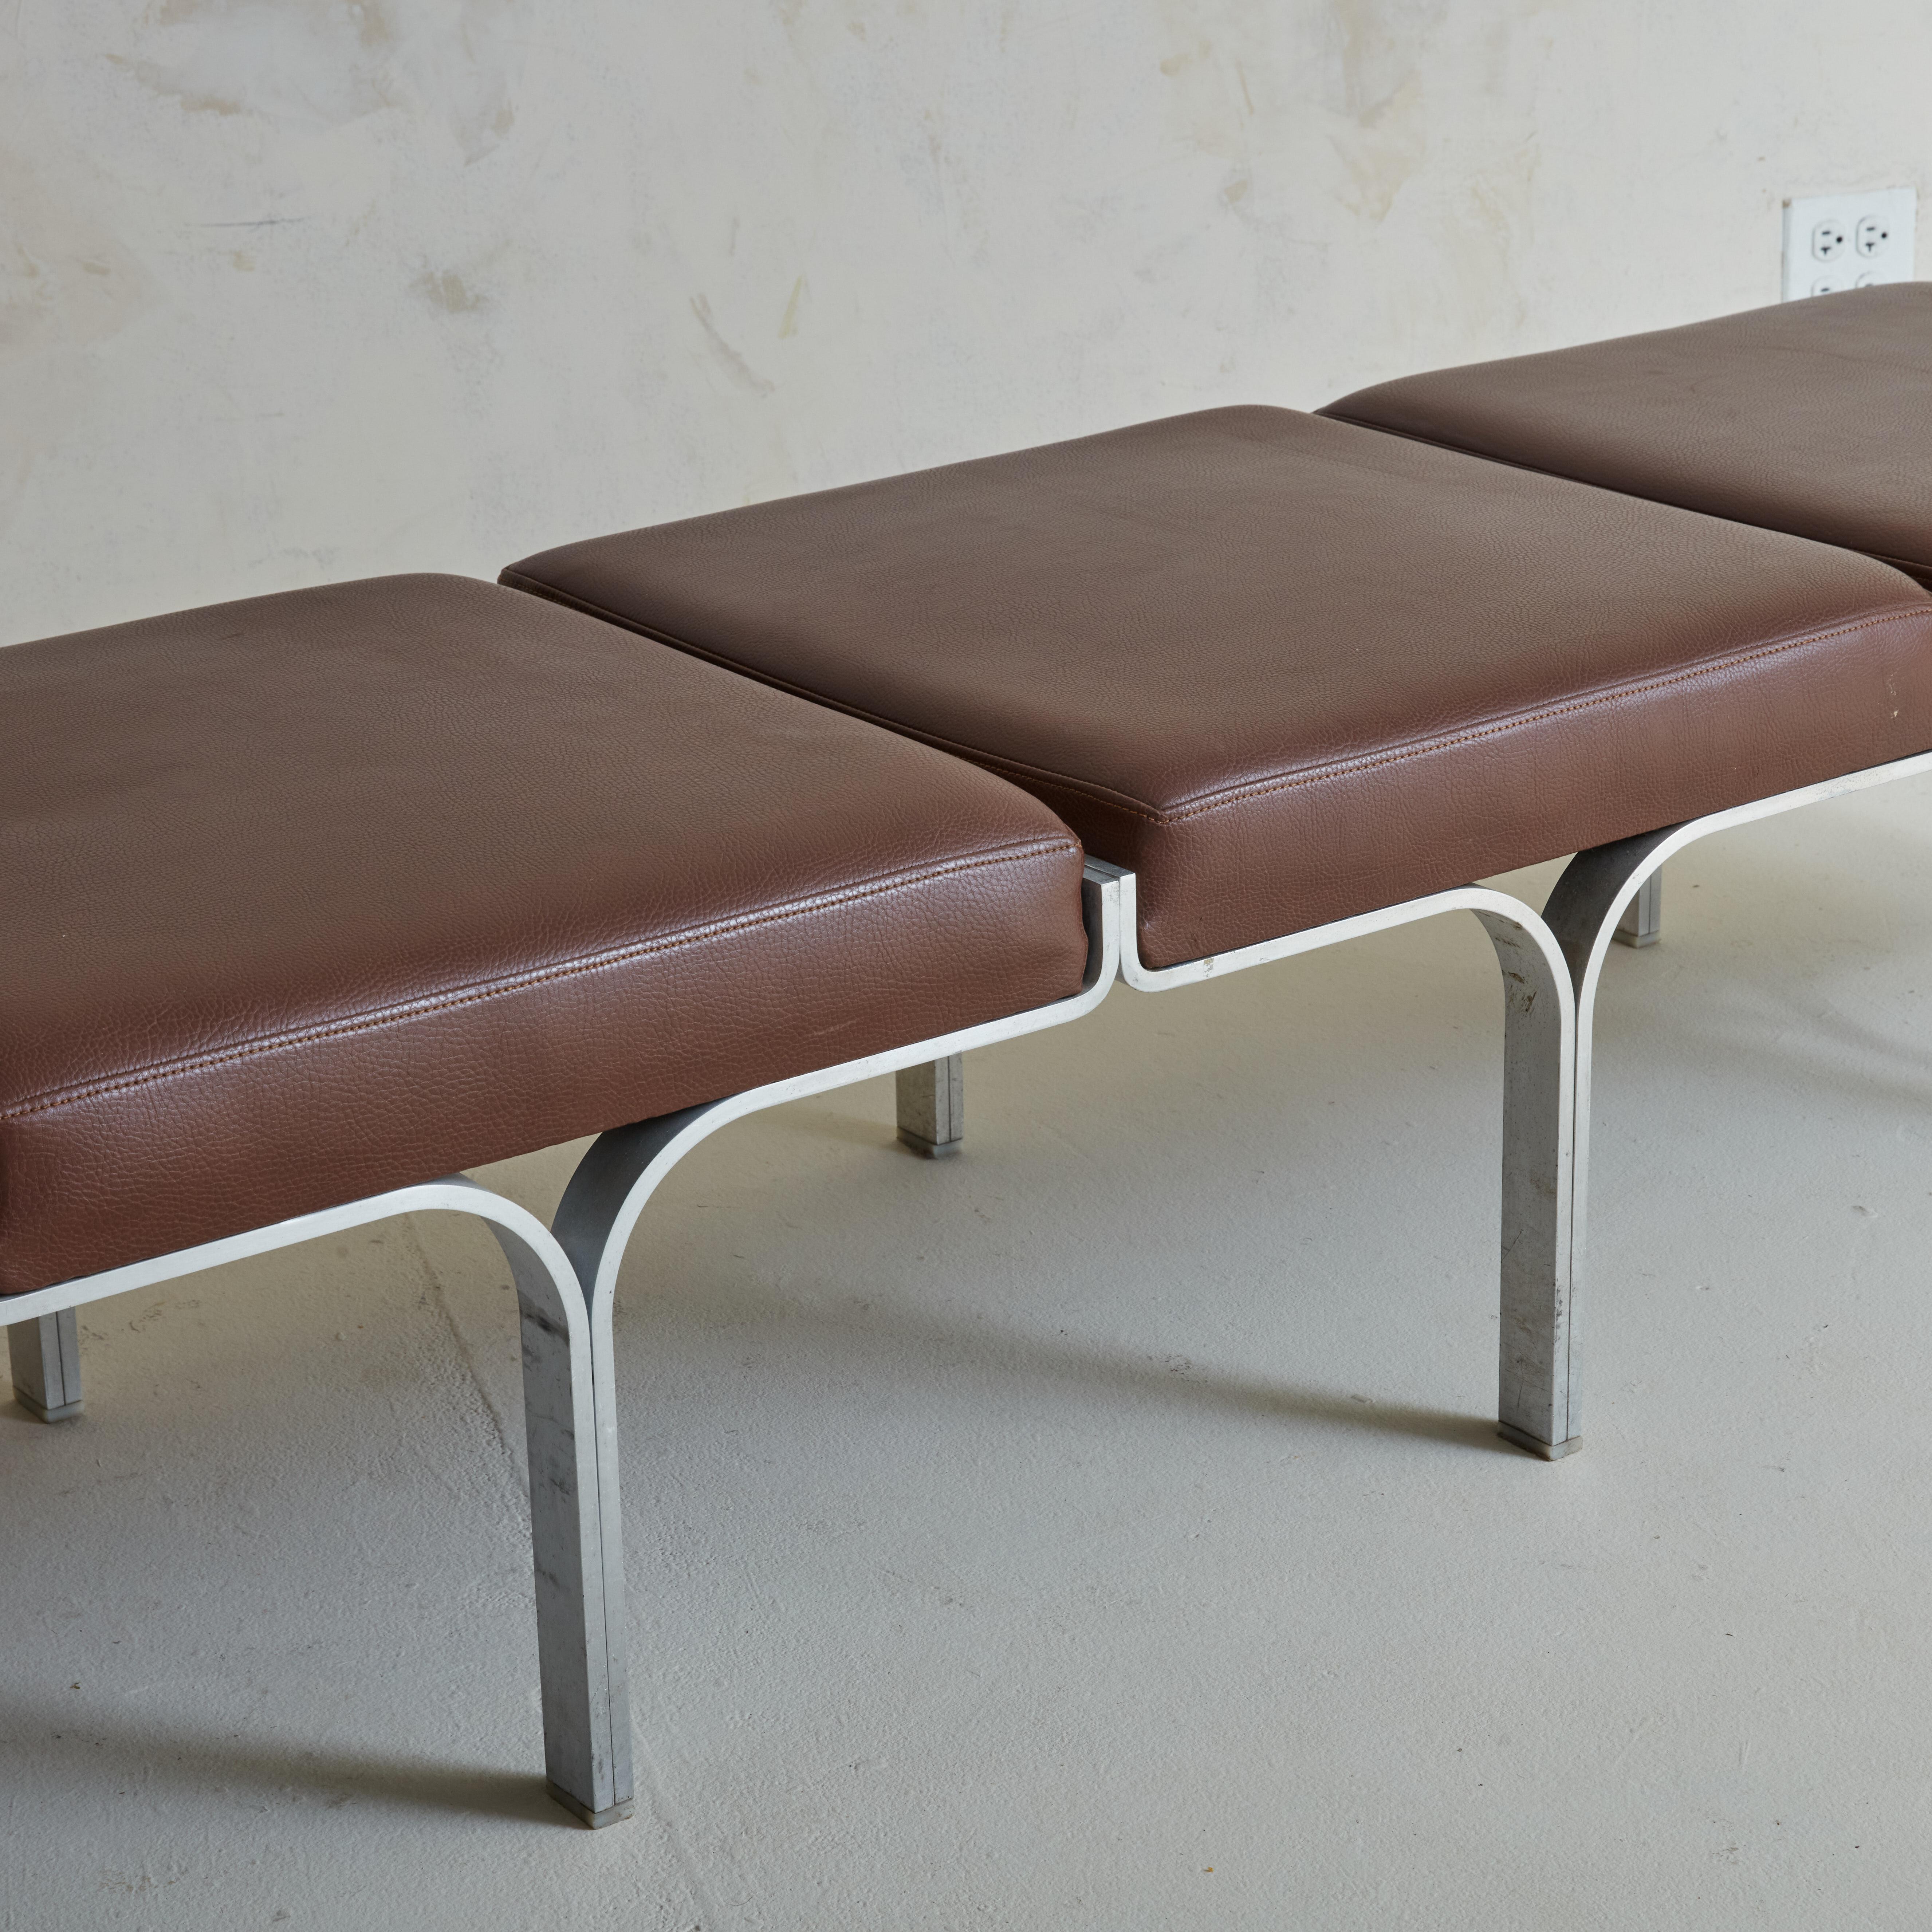 A magnificent 4-seater bench (model 656) by John Behringer for Fabry Associates. These iconic benches were used in the TWA terminal, designed by Eero Saarinen. This design is also part of MOMA’s permanent collection.22

John Behringer is an